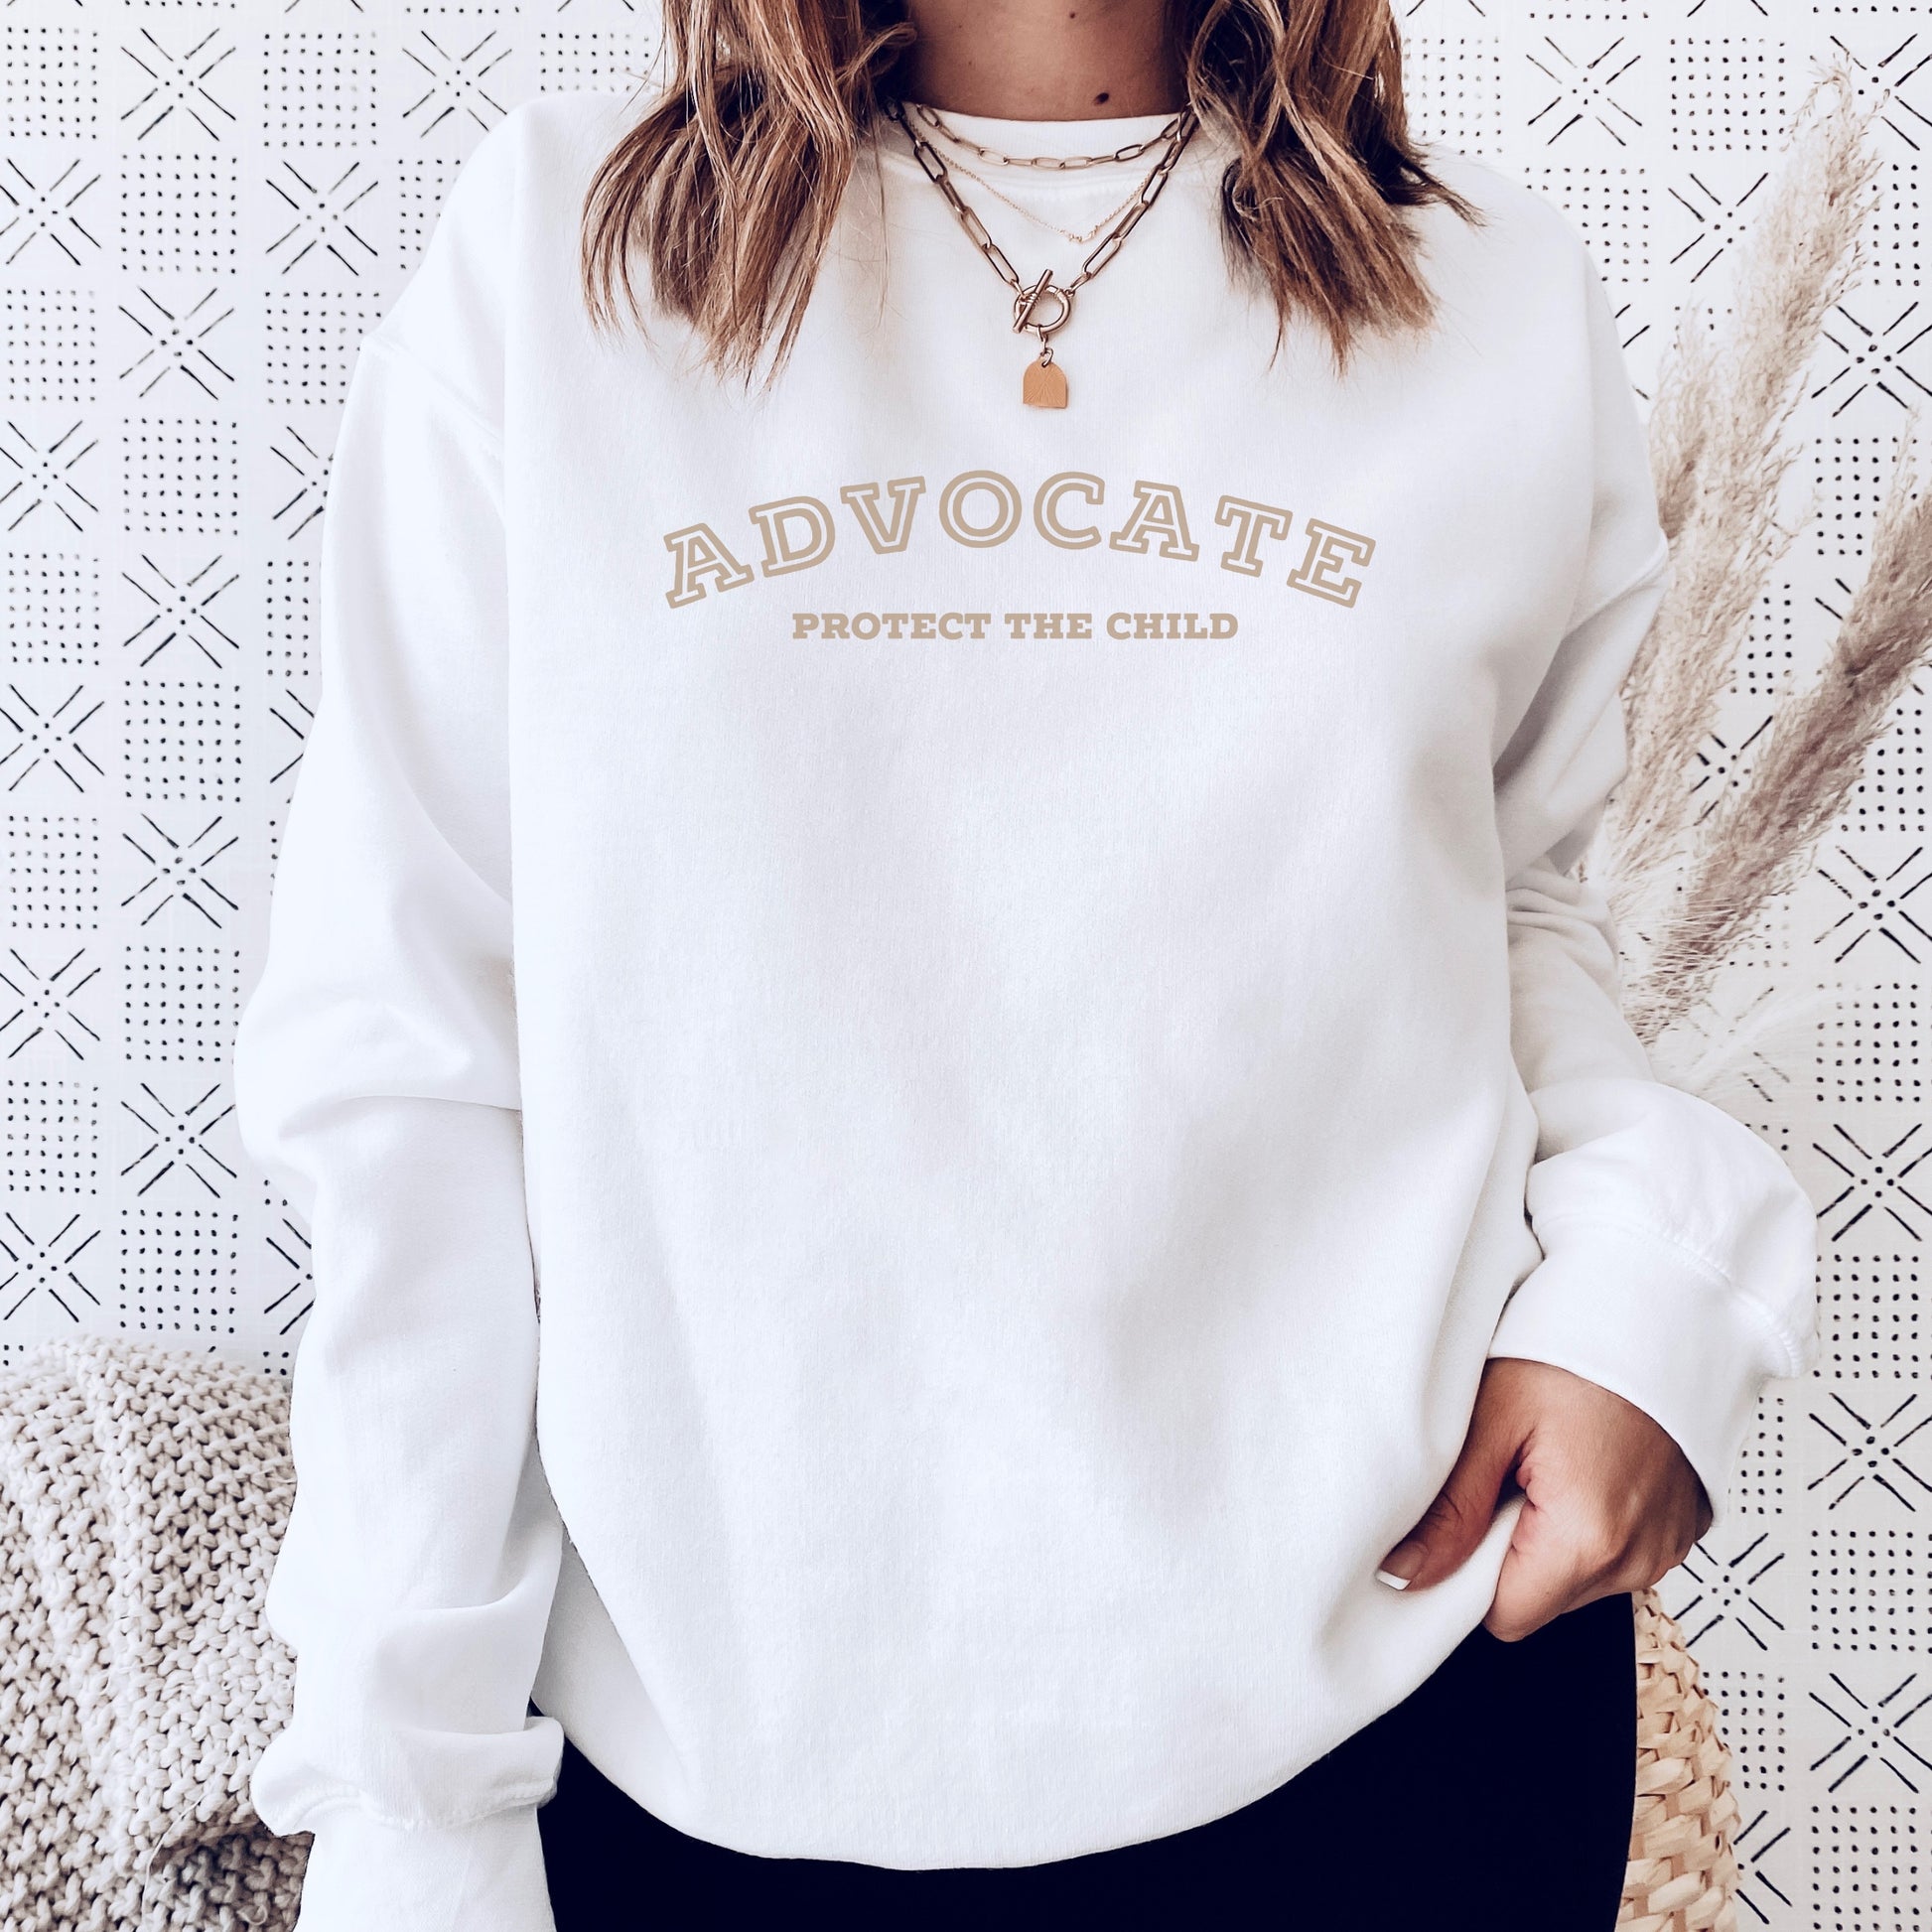 The front of the sweatshirt proudly displays the phrase "Advocate Protecct The Child" in a bold and eye-catching font. Crafted for child advocates and champions of children's mental health, and perfect for Child Abuse Awareness and Prevention Month!